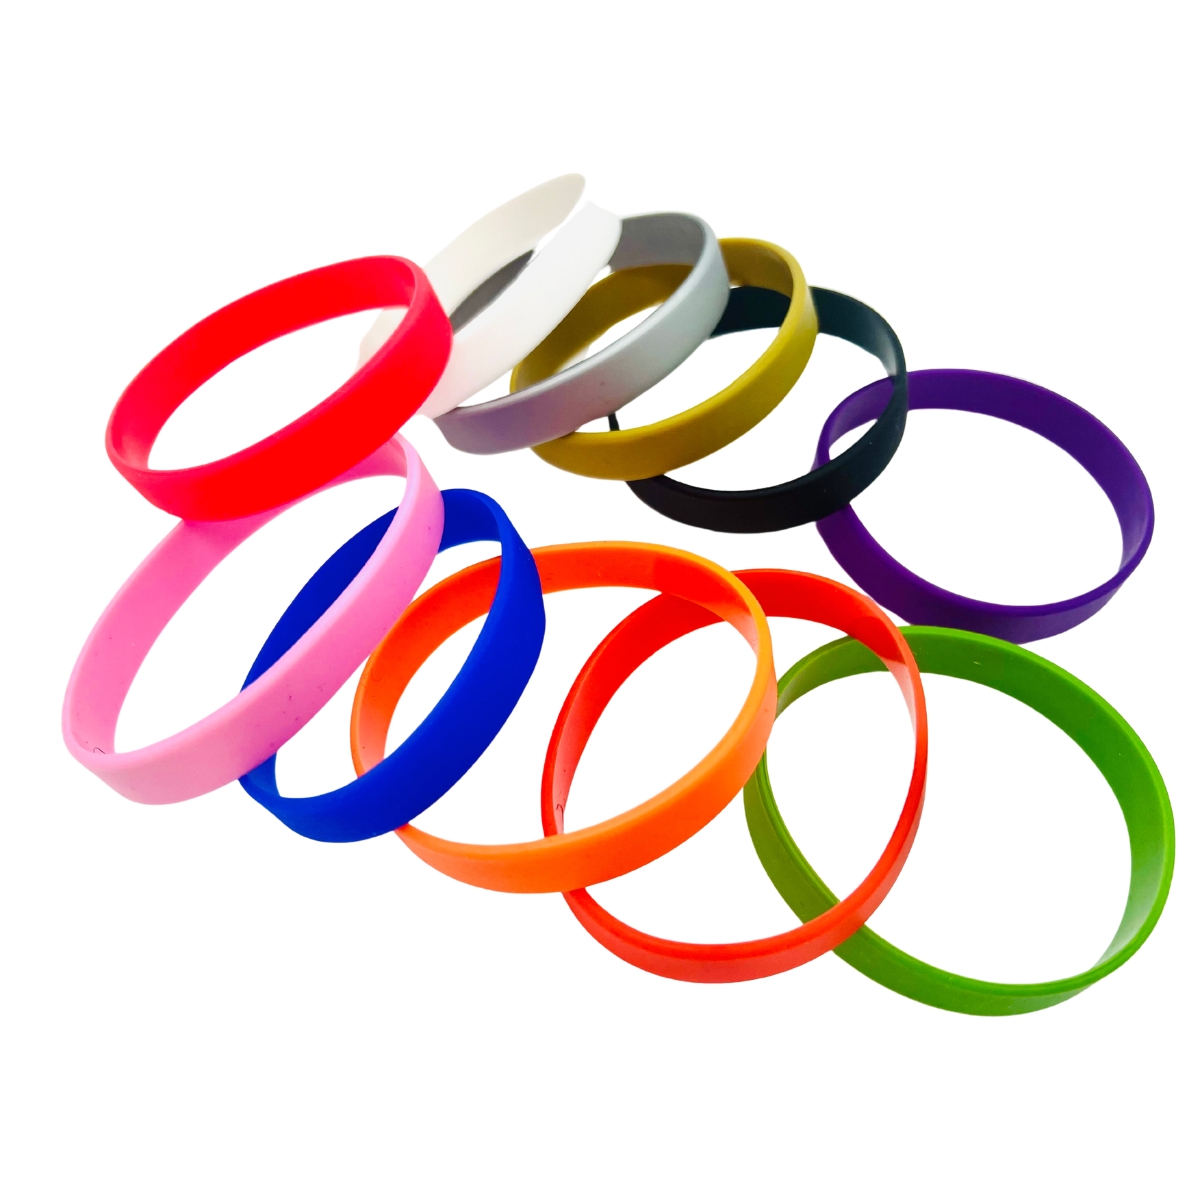 Plain Silicone Wristbands (Packs of 100)